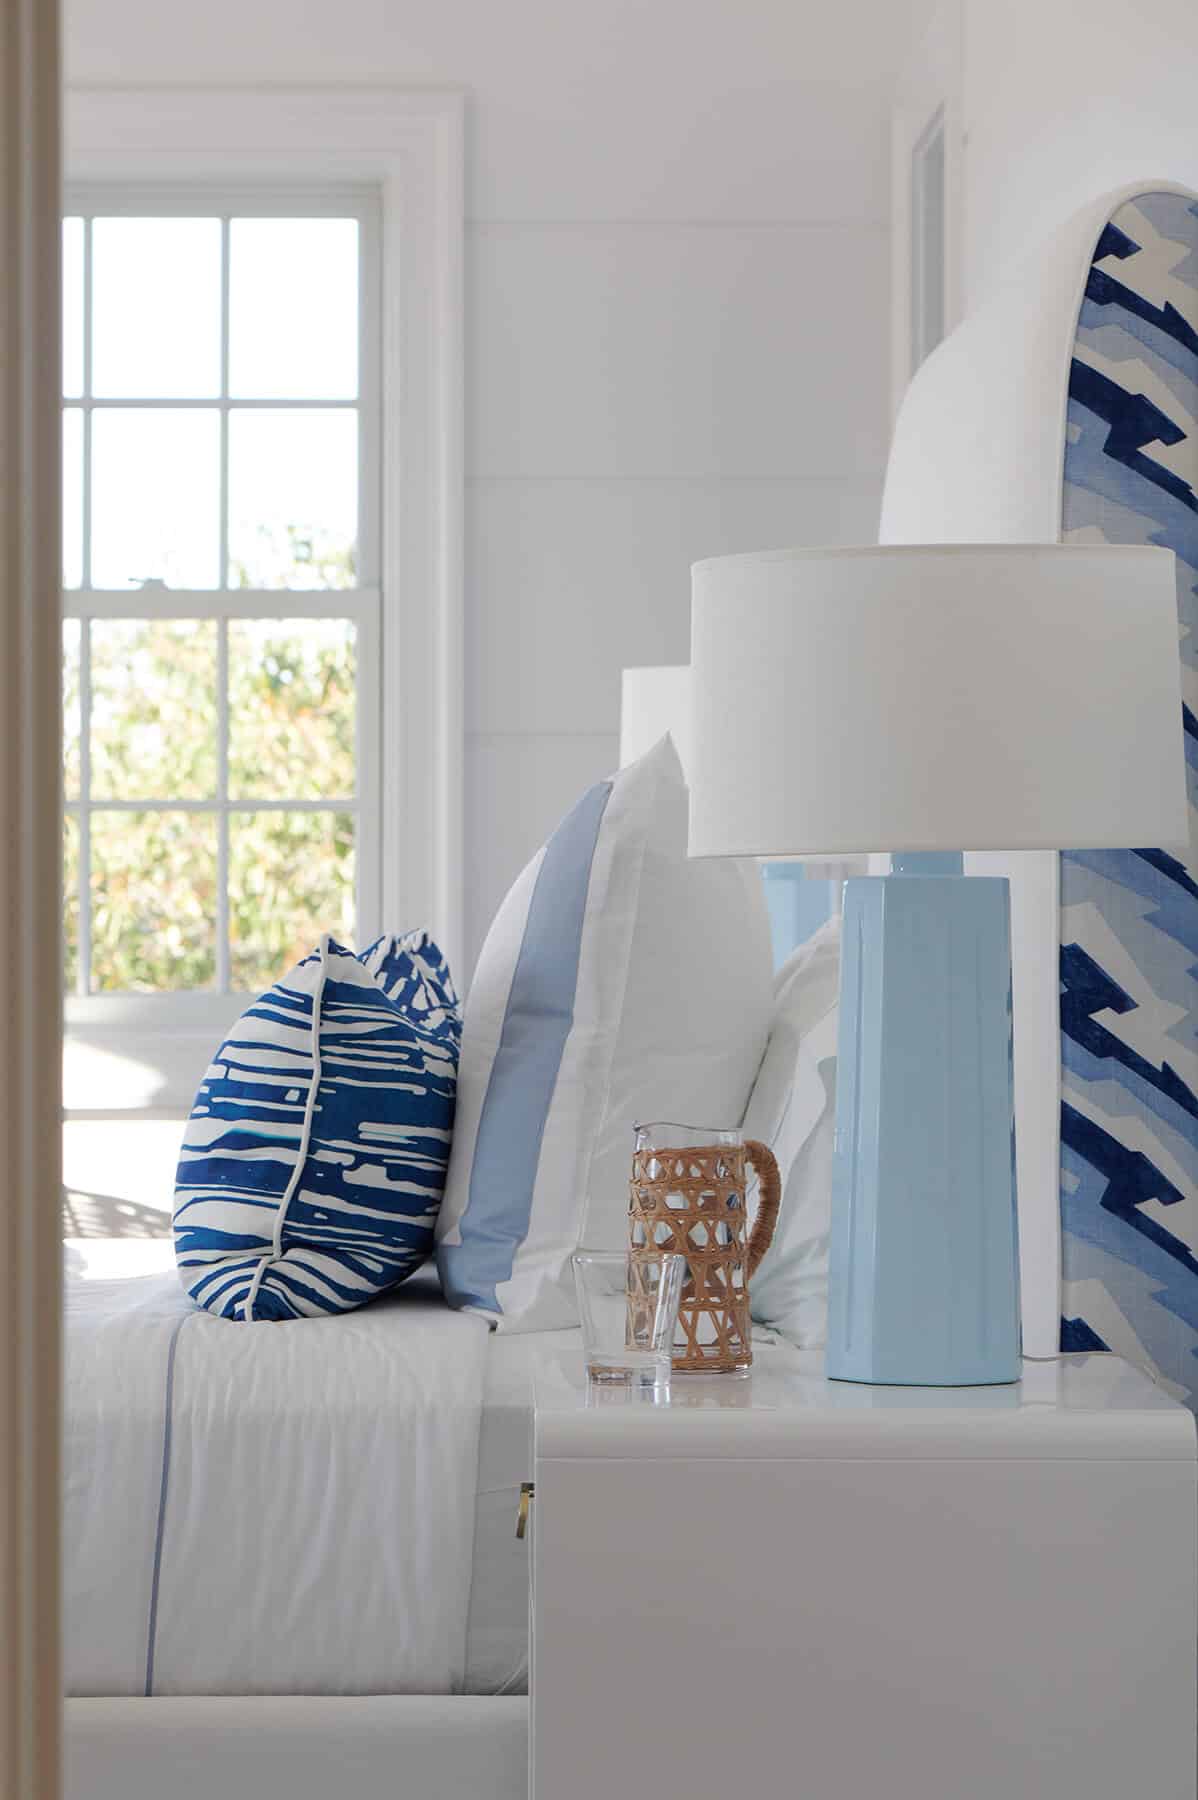 Nantucket, blue and white bedroom seen from the doorway